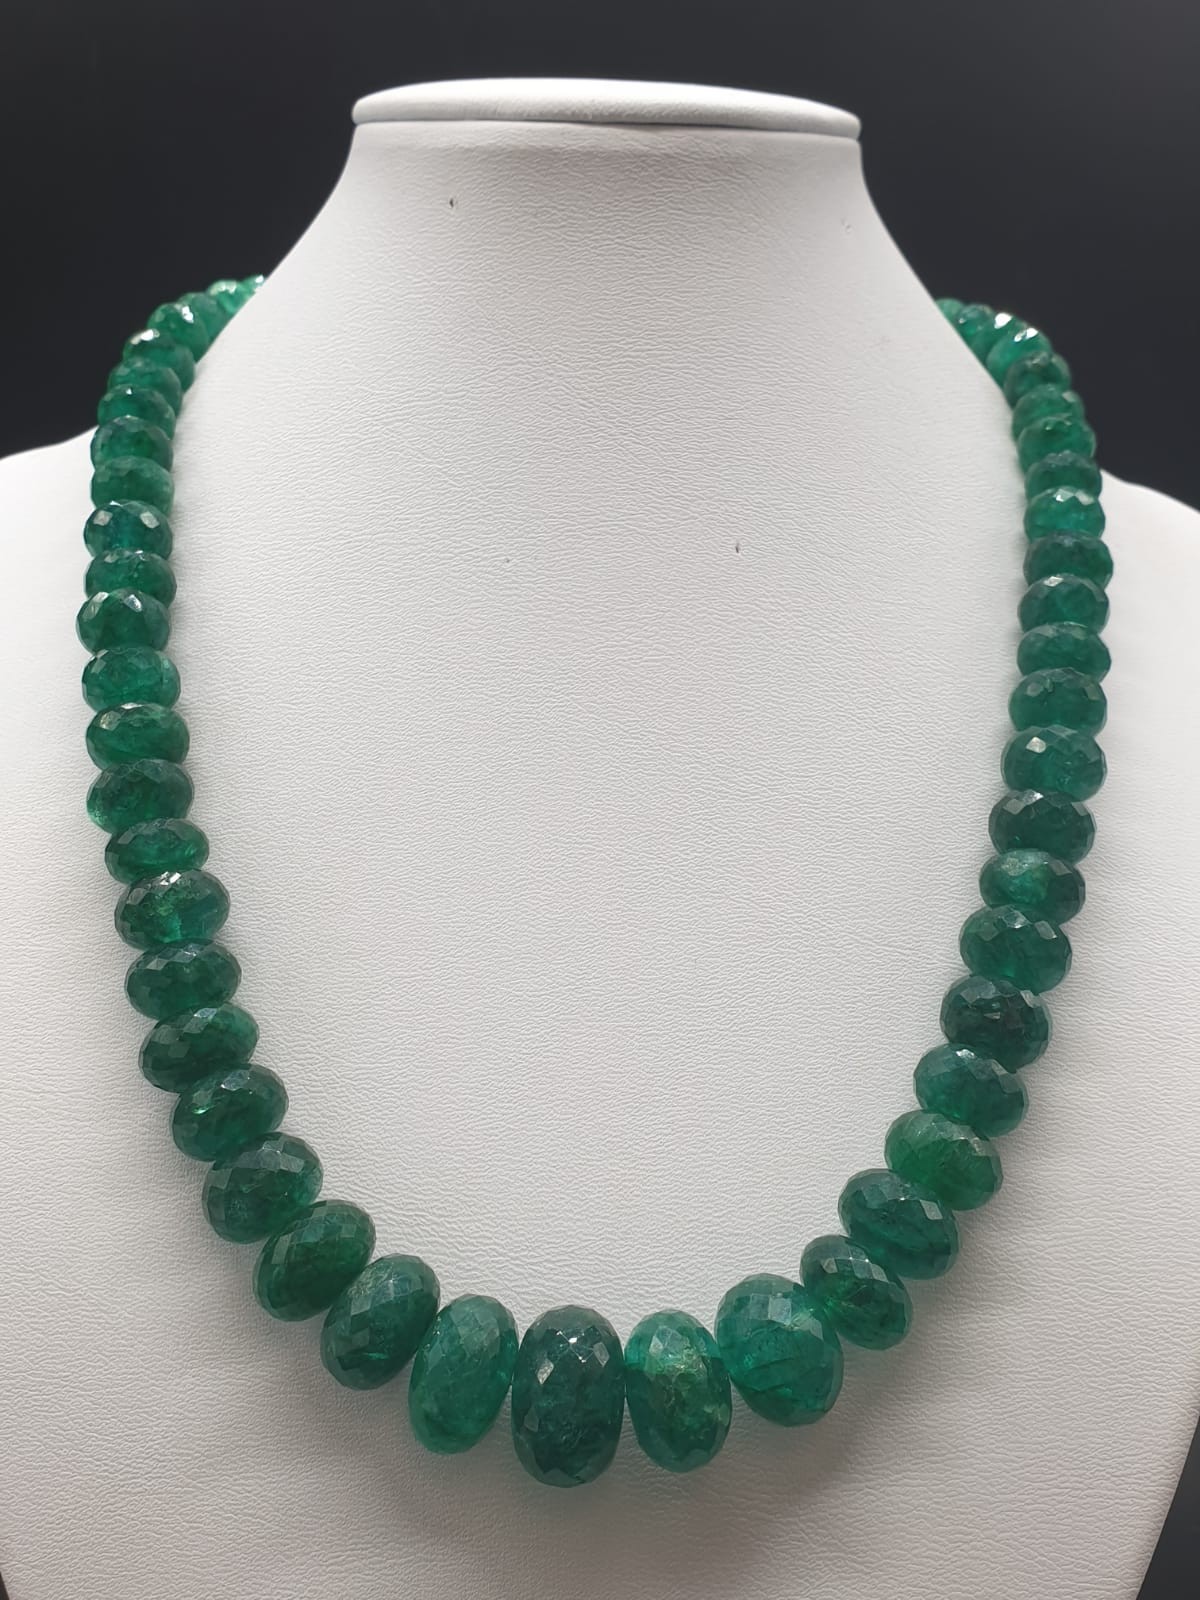 440cts Emerald Necklace with Pearl Clasp - Image 4 of 6